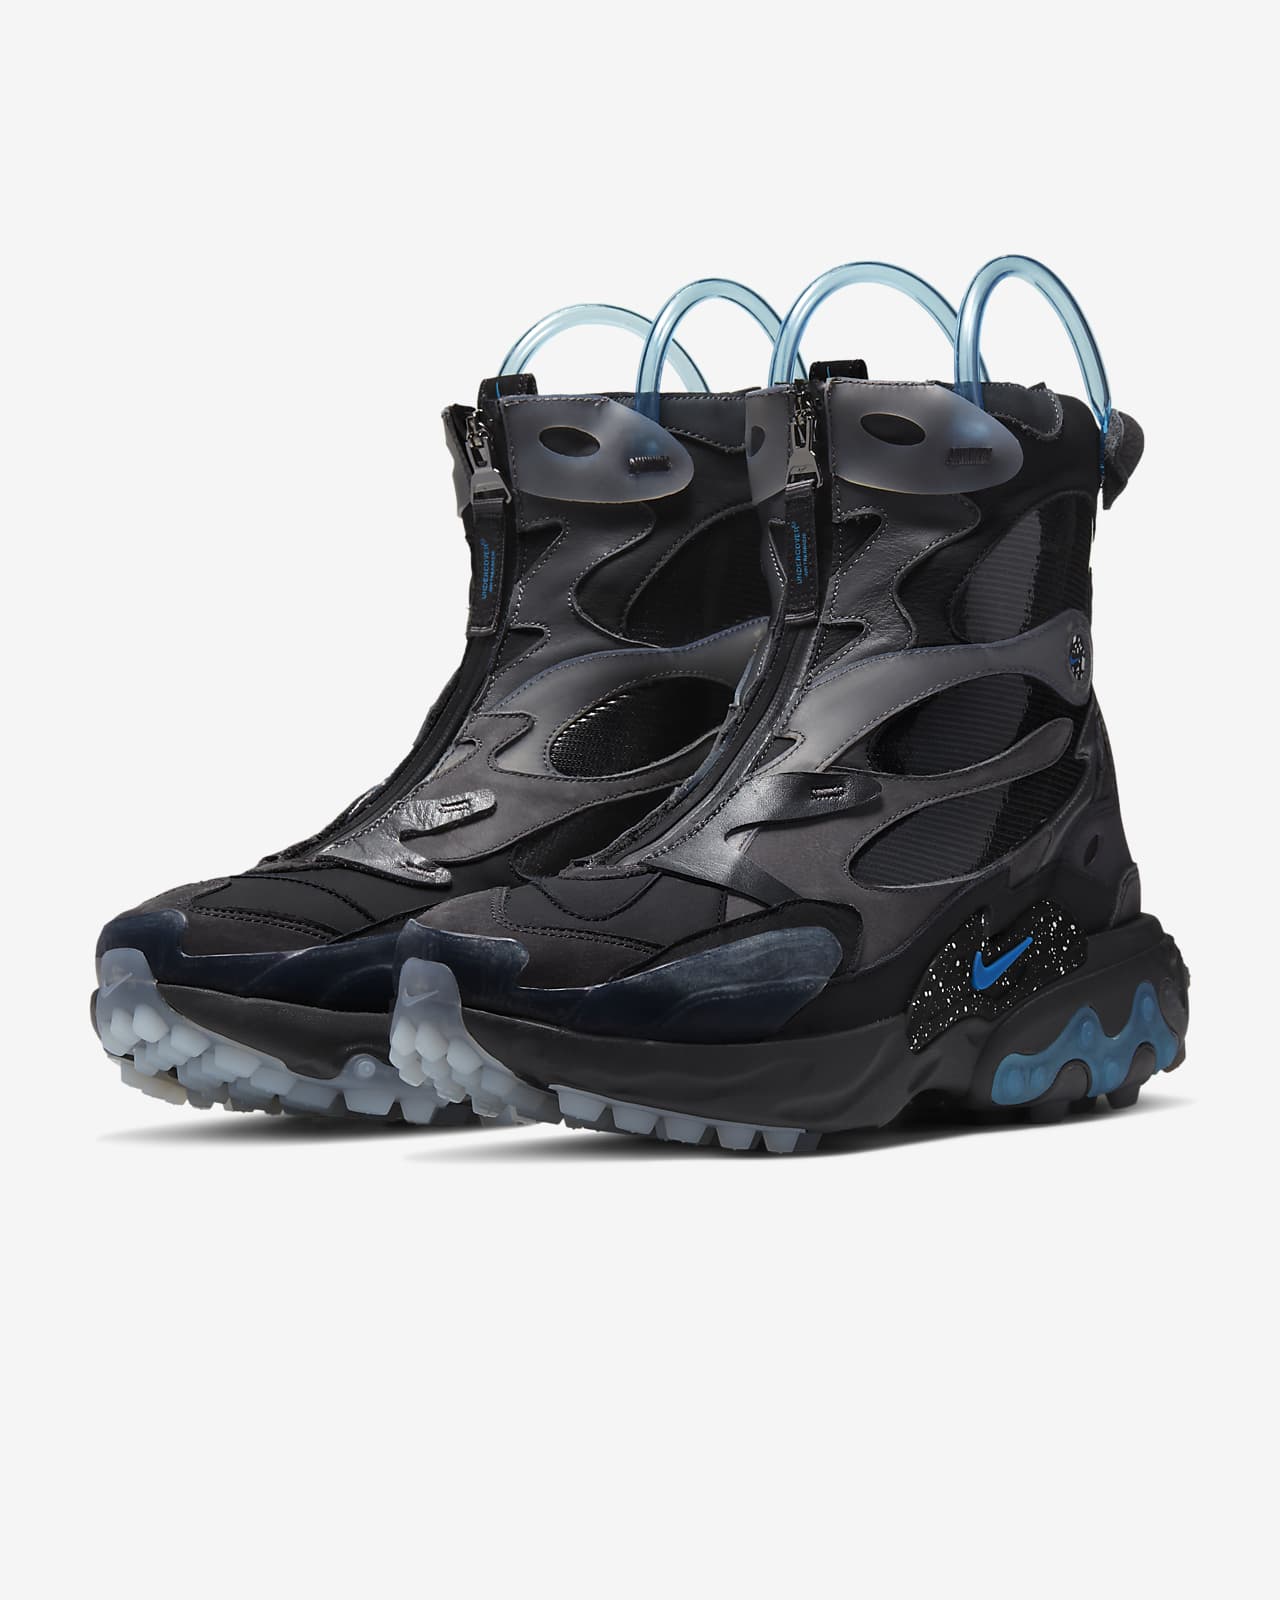 undercover nike react boot